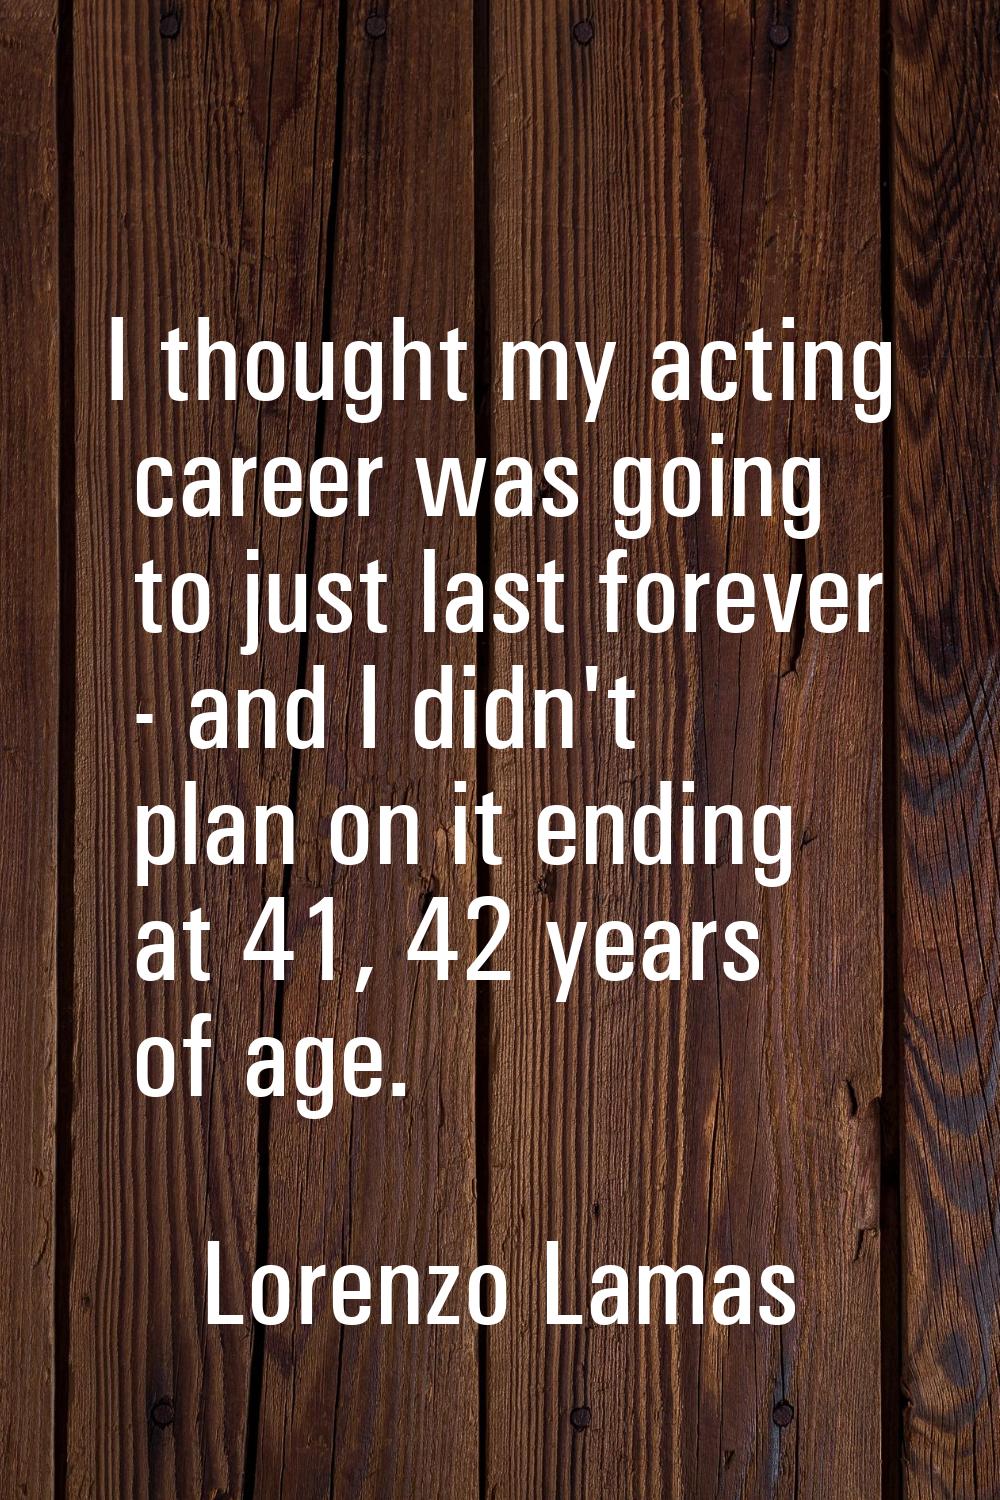 I thought my acting career was going to just last forever - and I didn't plan on it ending at 41, 4